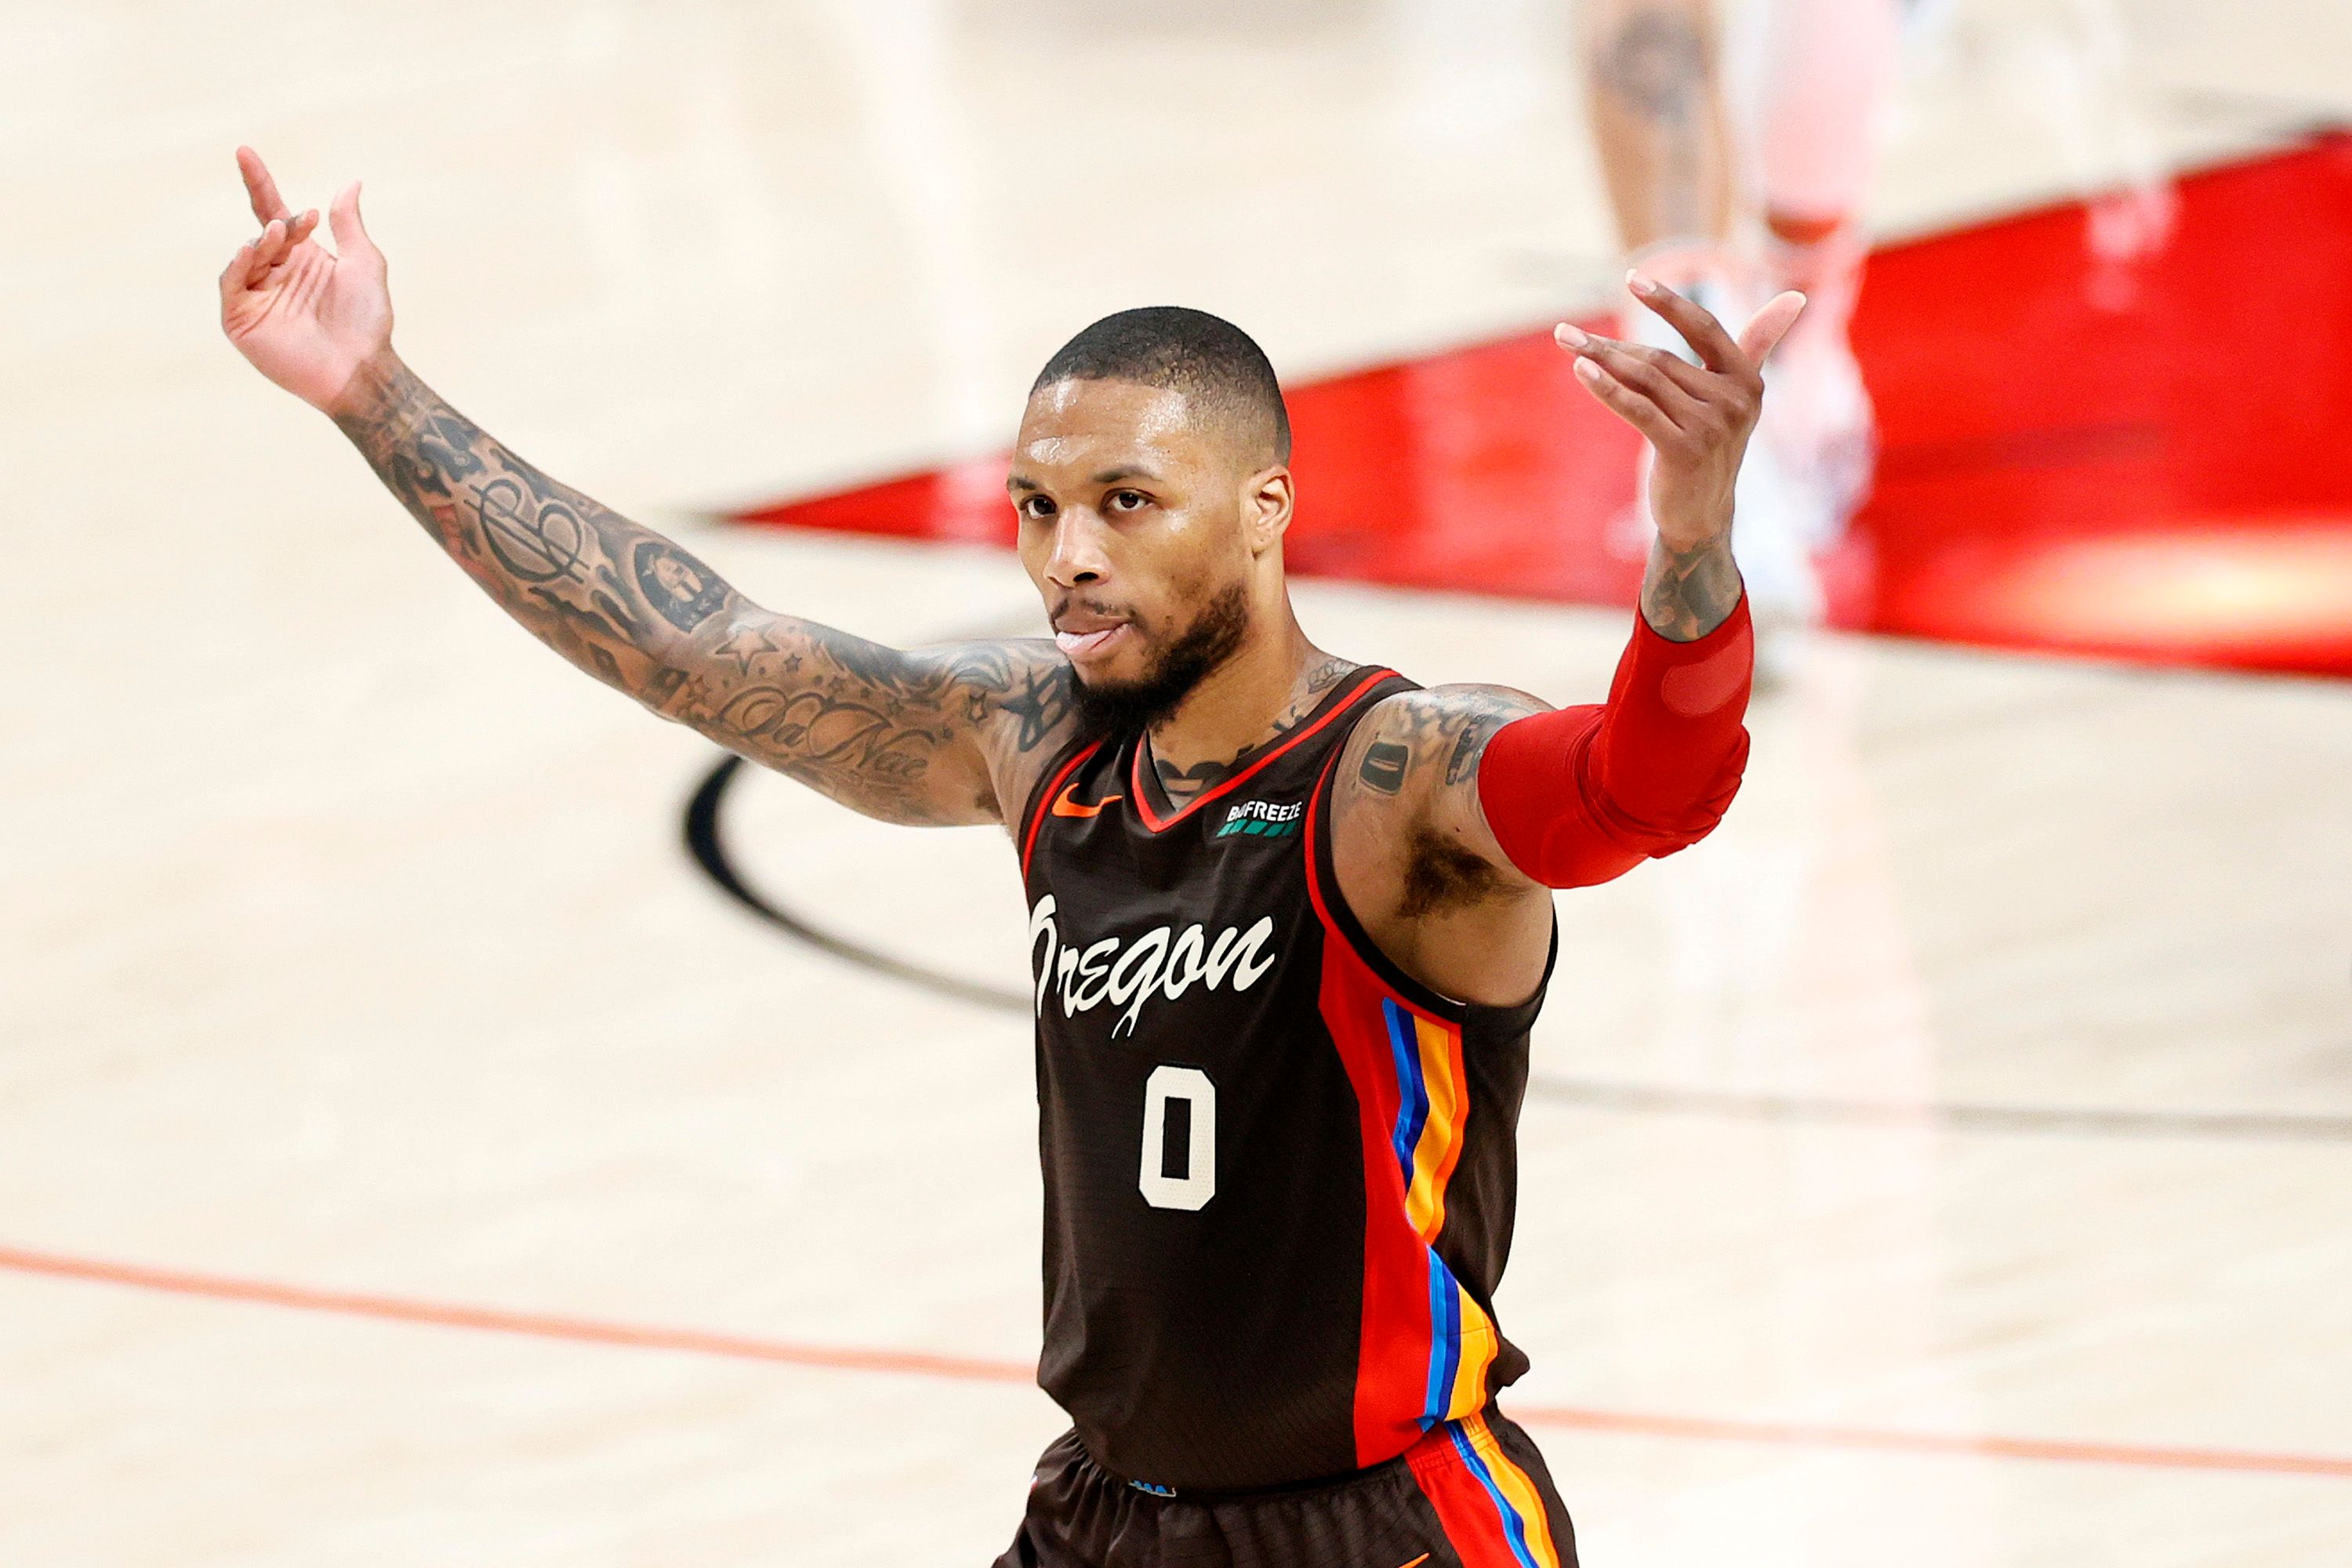 Damian Lillard urging fans to cheer after a successful basket